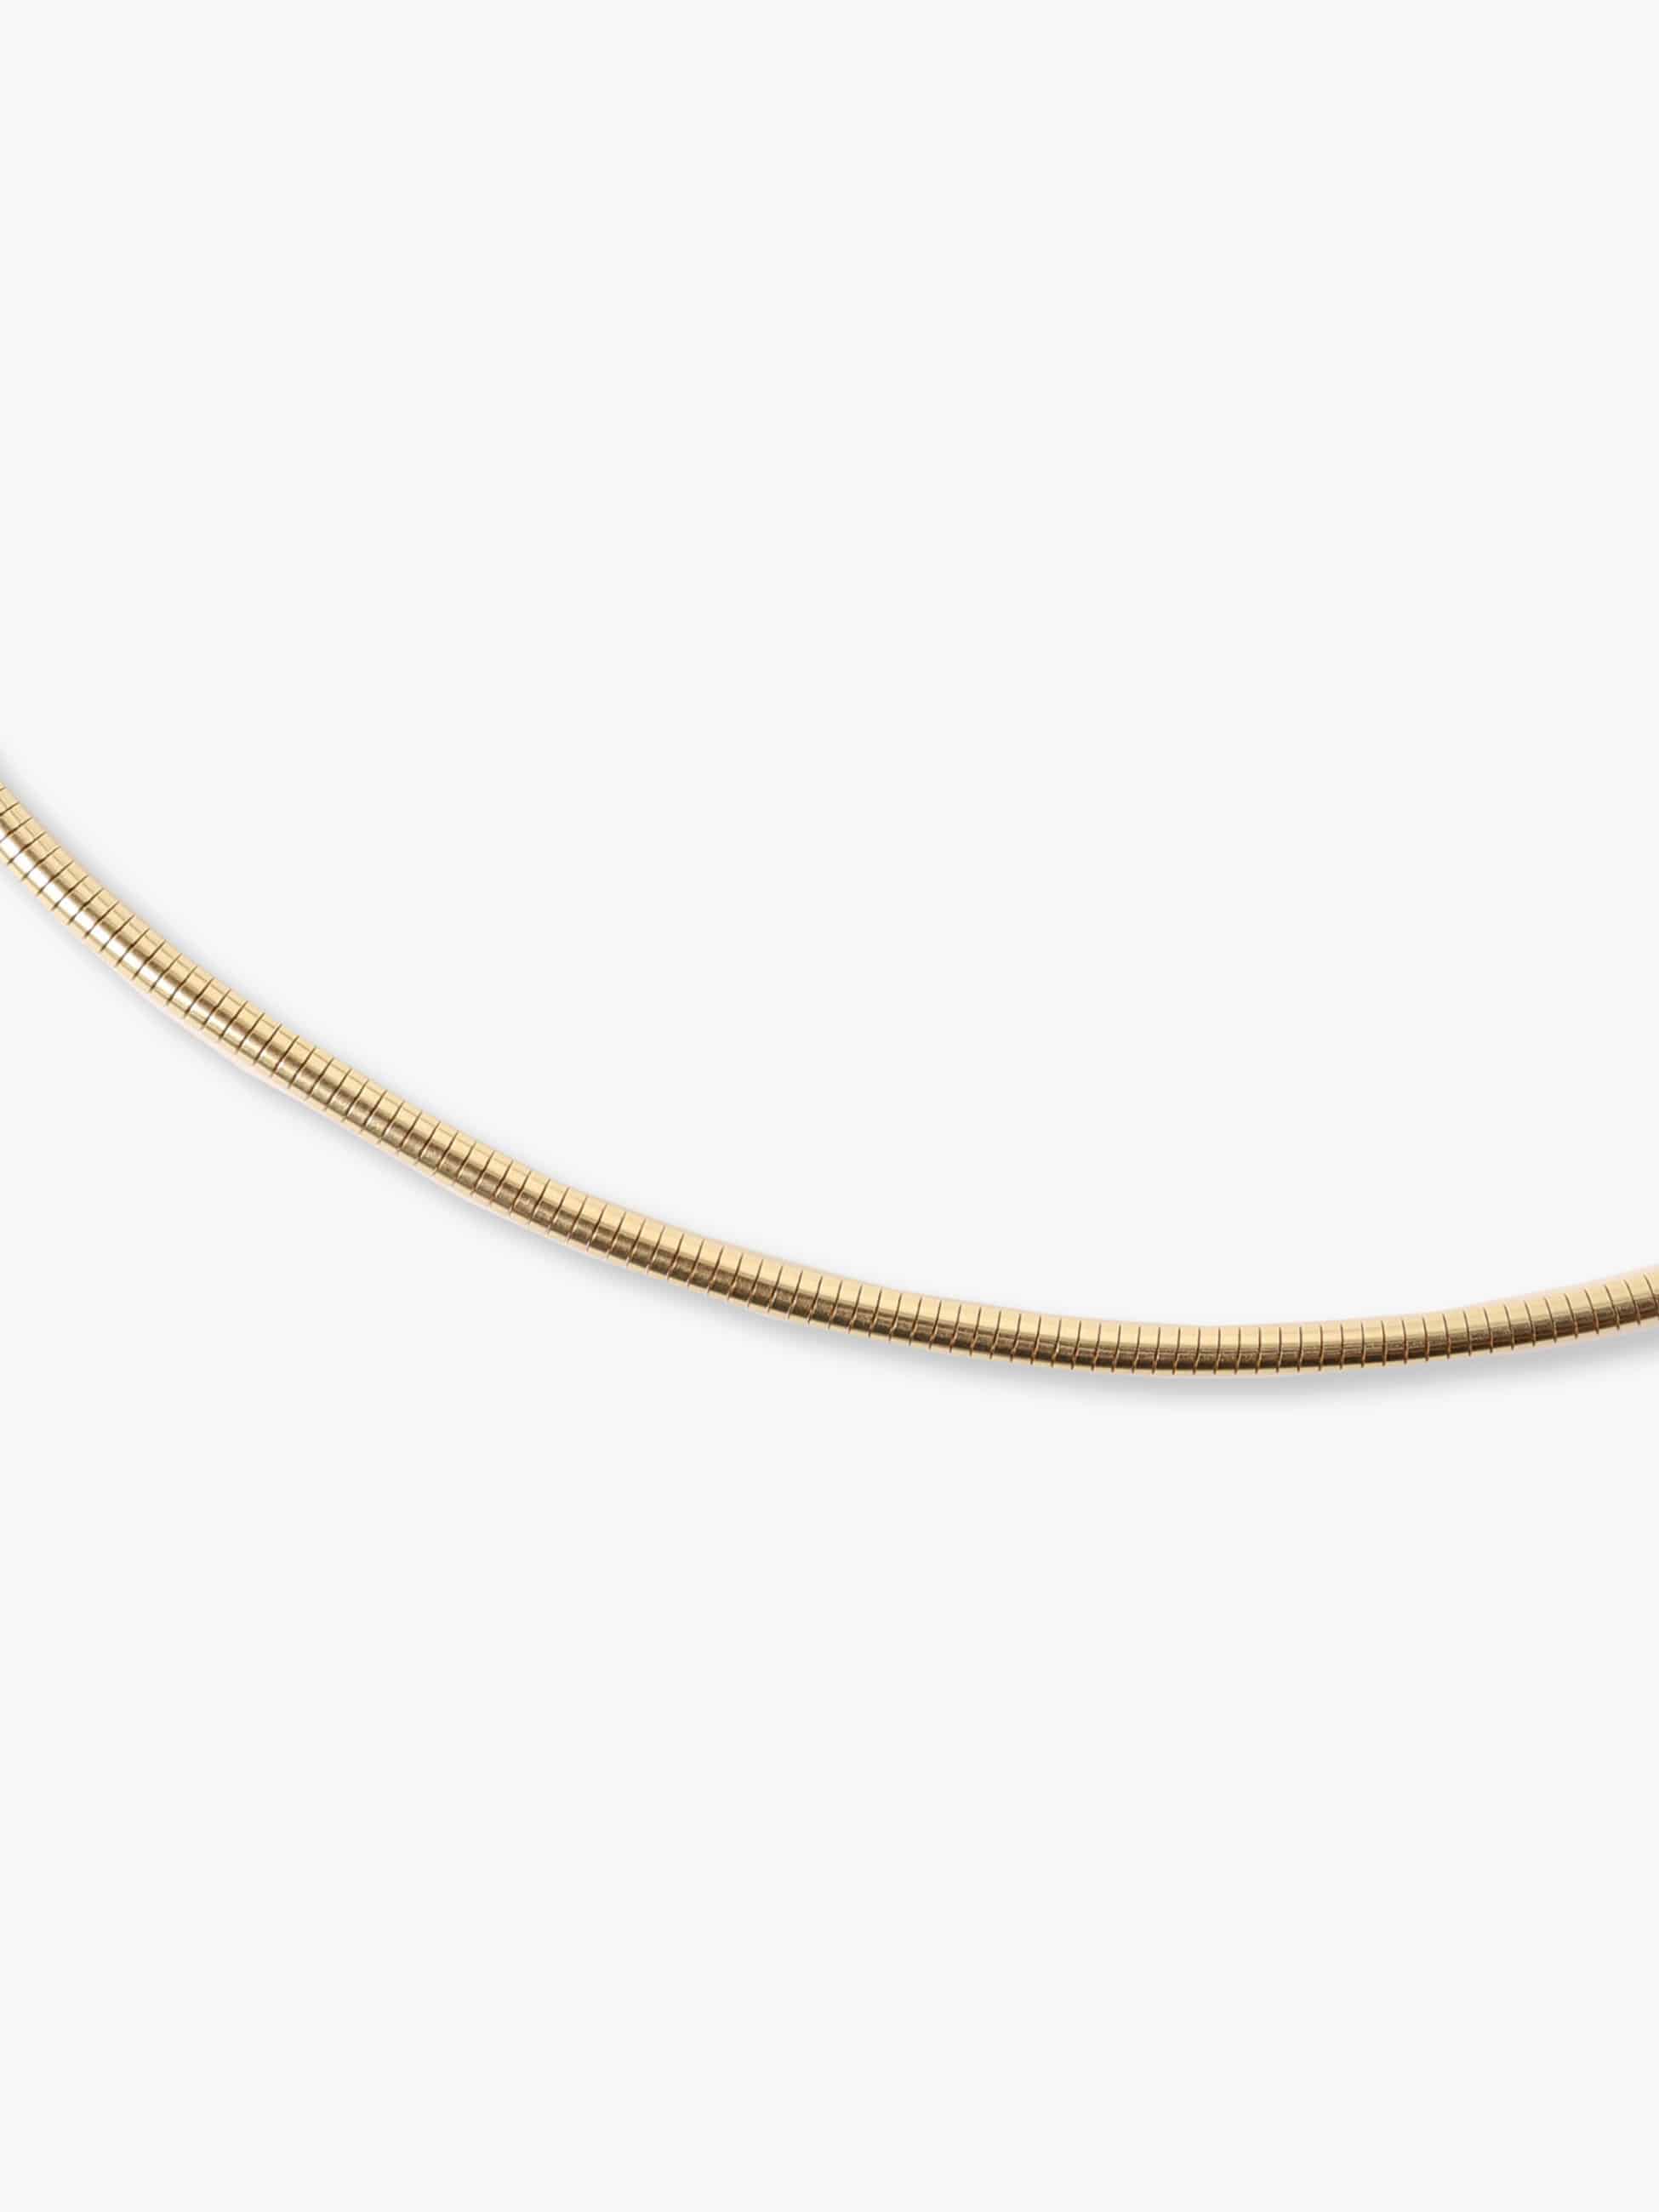 Silky Snake Chain Necklace (16inch) 詳細画像 yellow gold 1